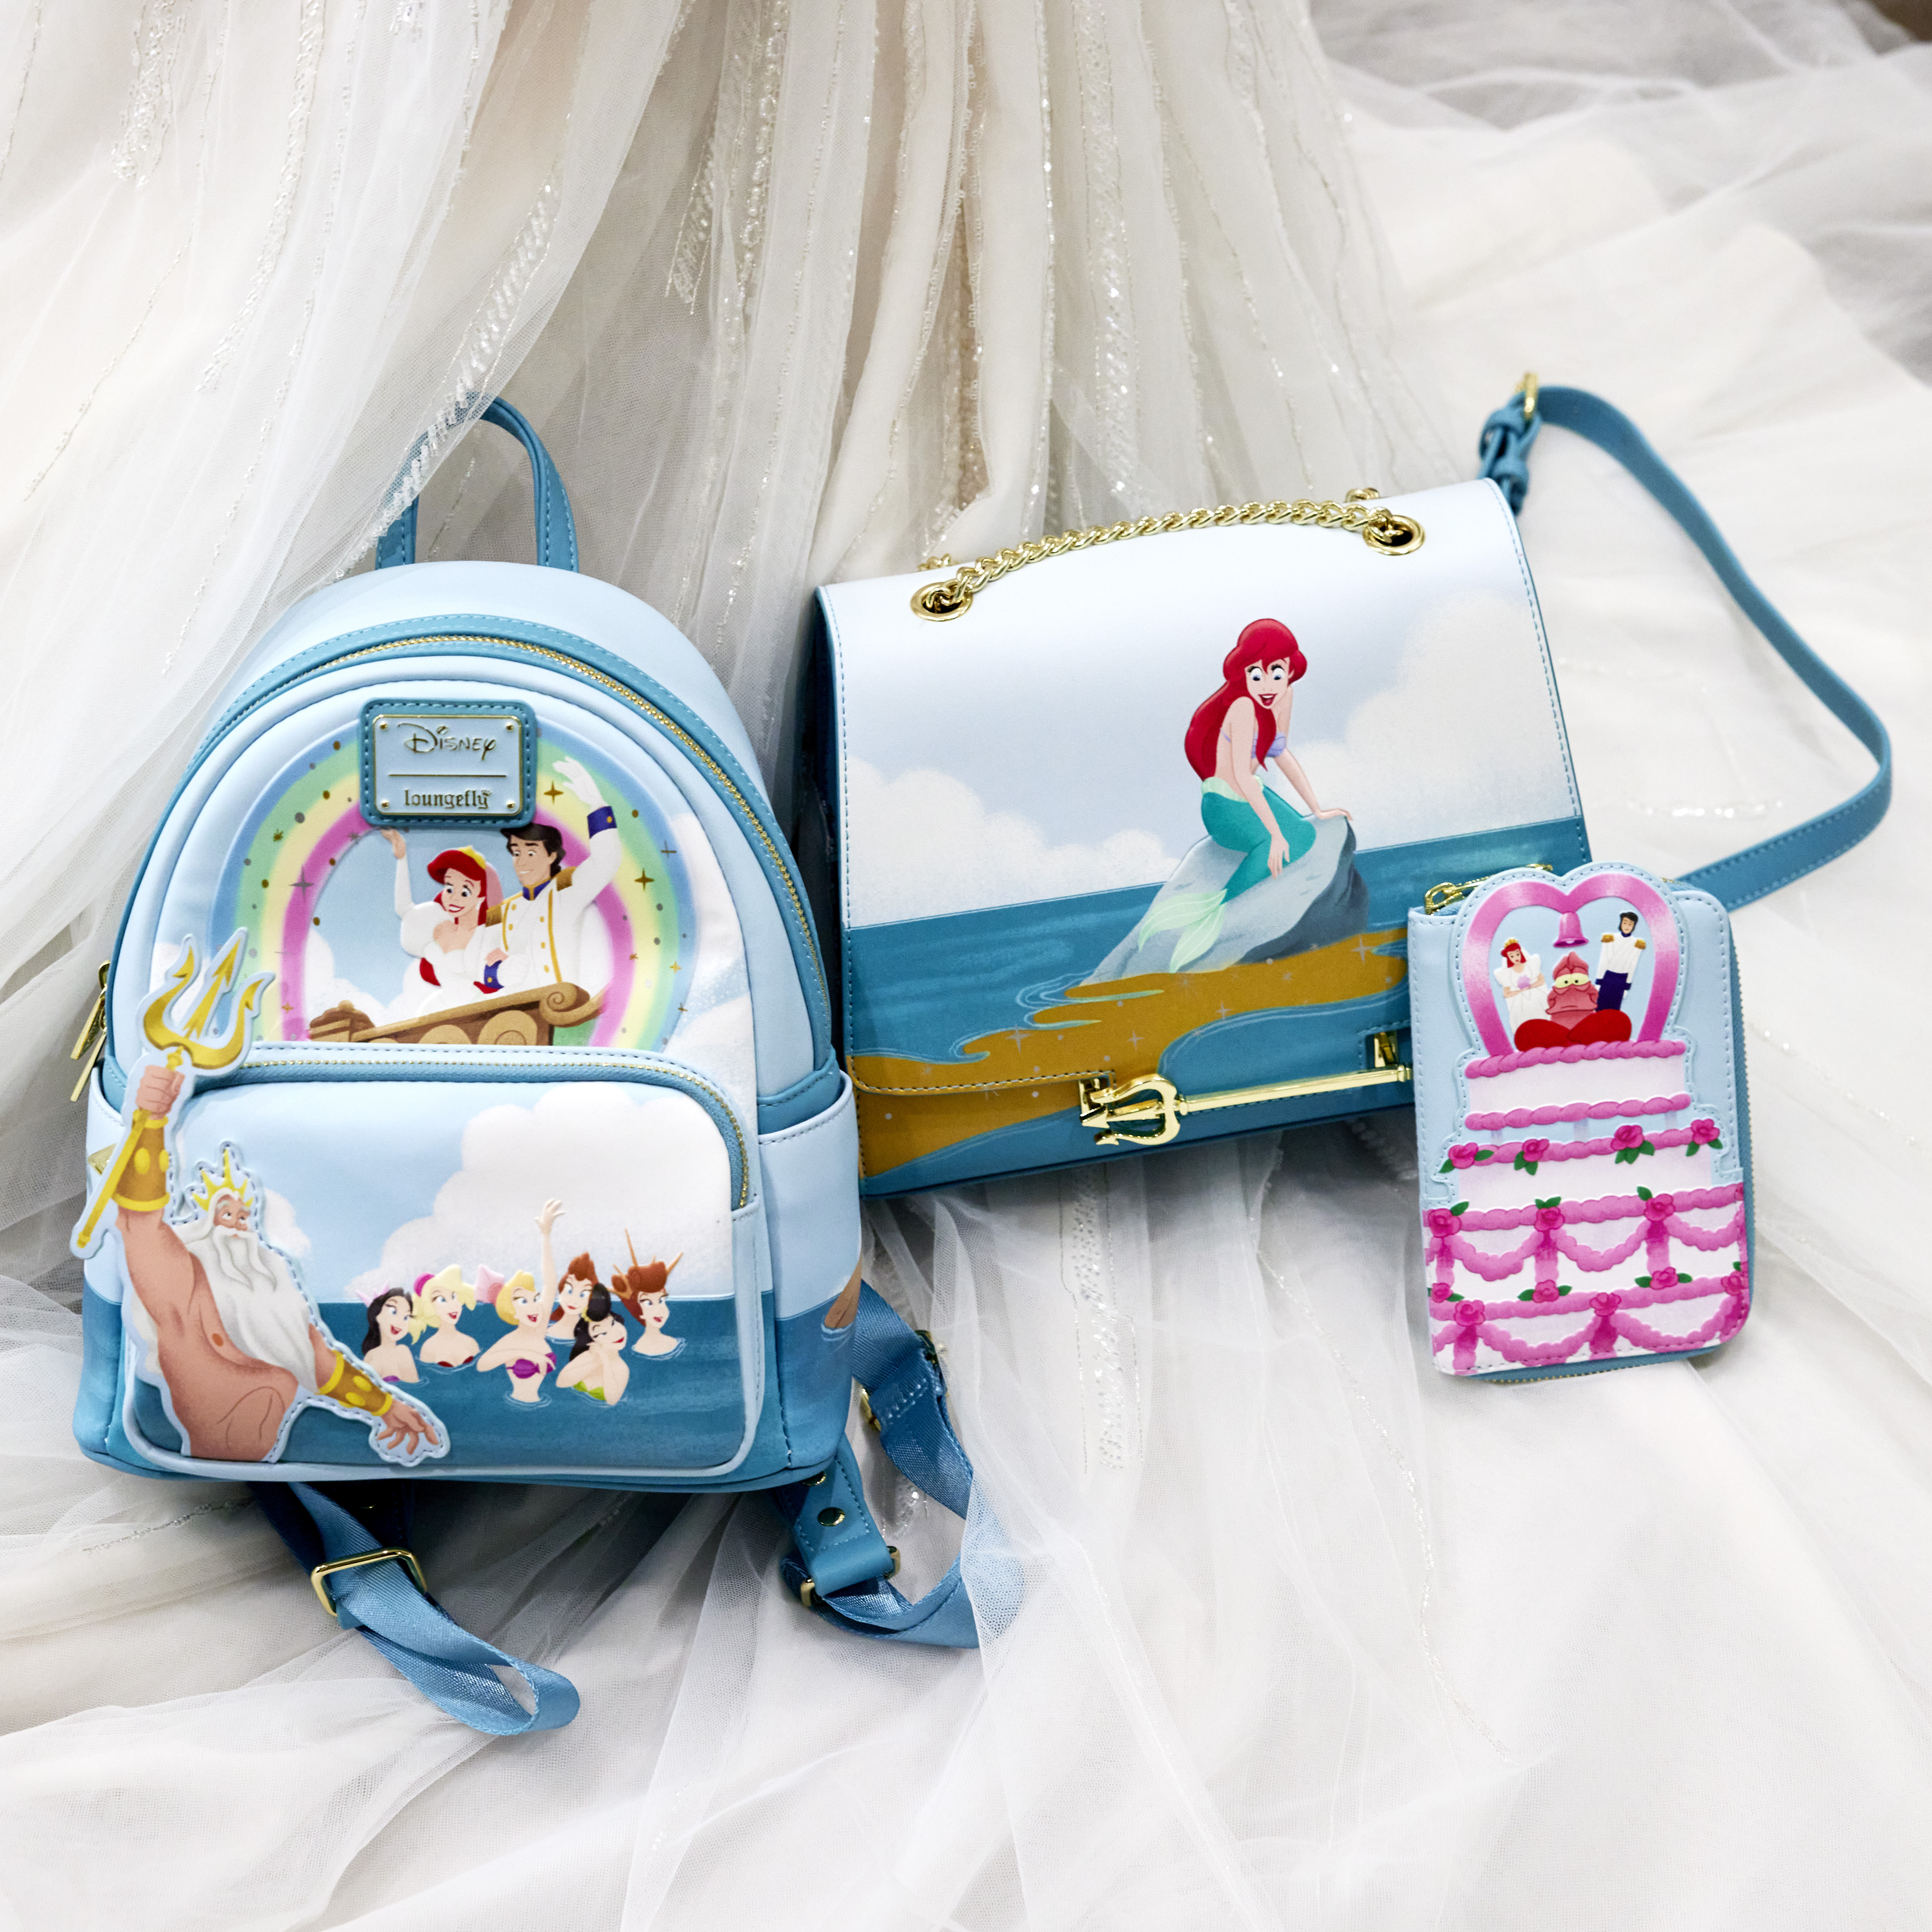 The Little Mermaid Triton's Gift Mini Backpack and Crossbody Bag, and Ariel Wedding Cake Zip Around Wallet sitting atop the bottom of a wedding gown